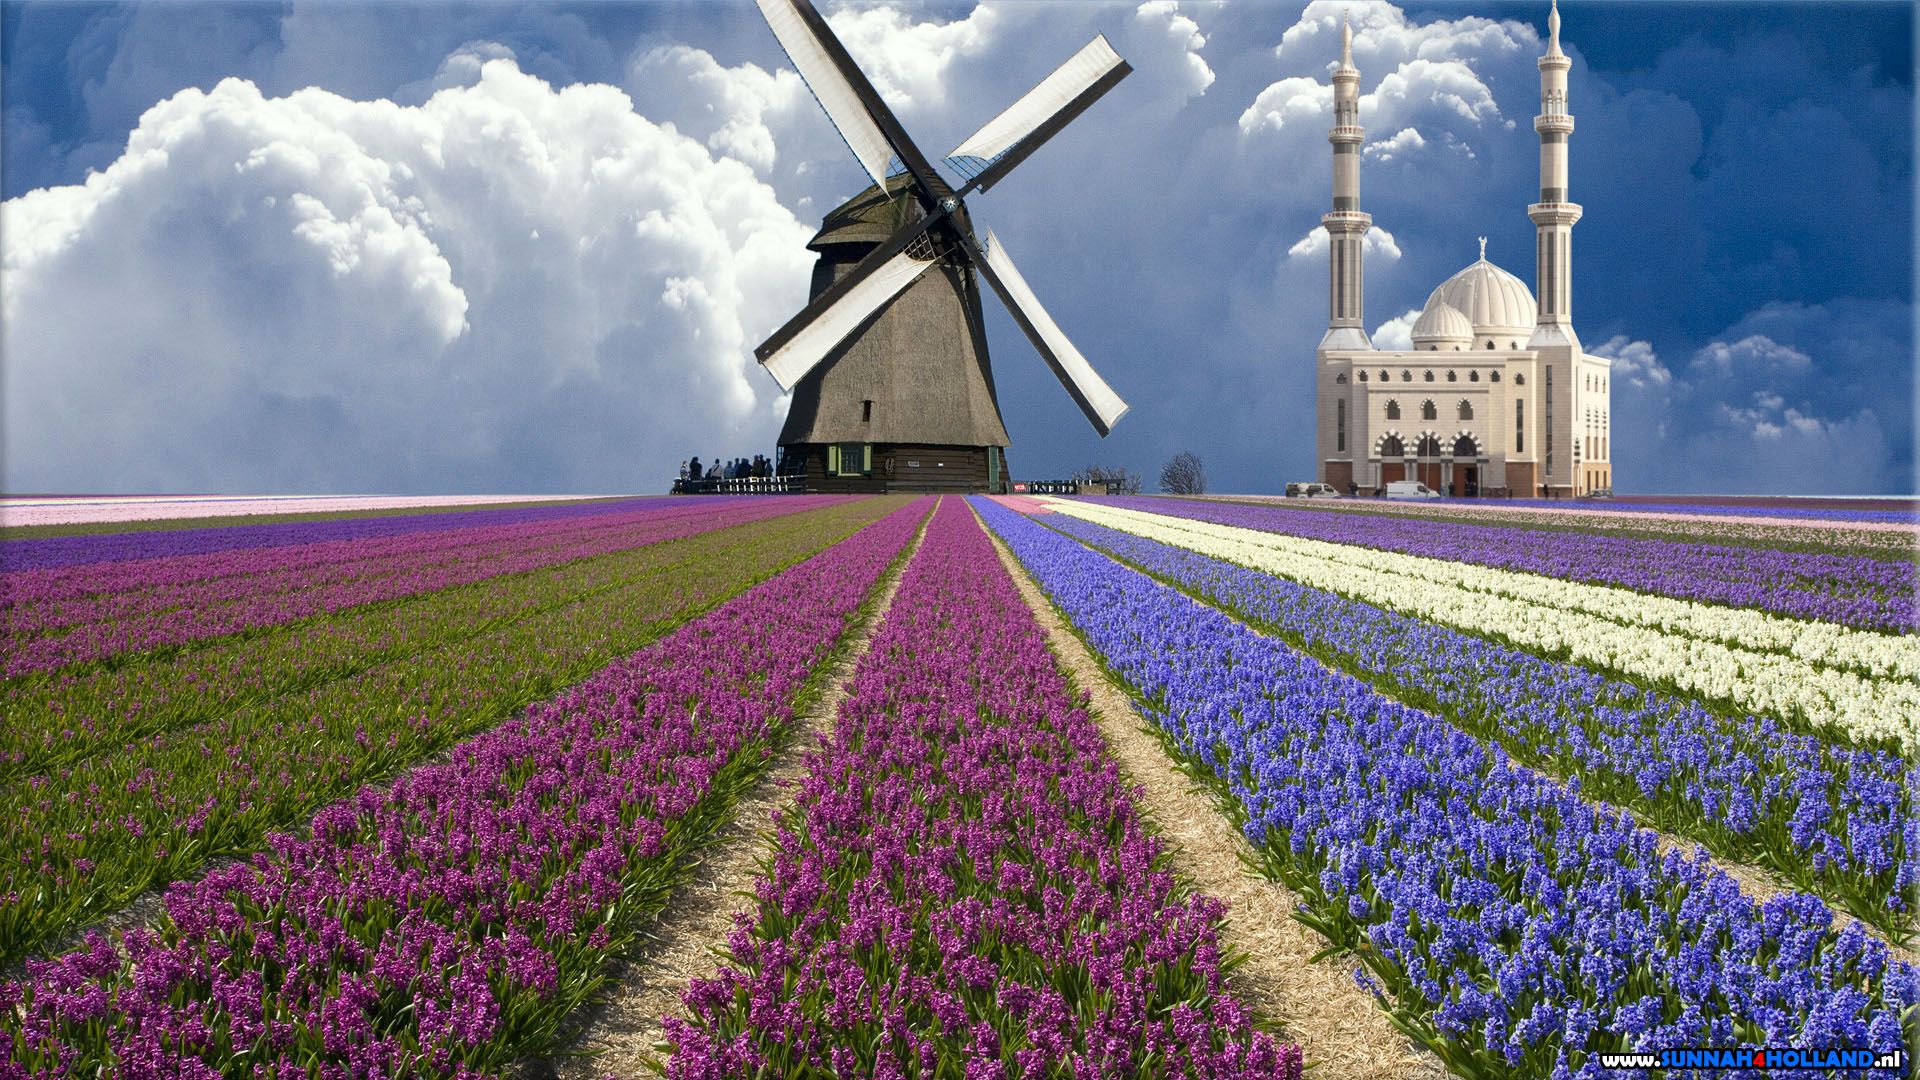 Dutch Mosque With Tulips And A Windmill (molen)